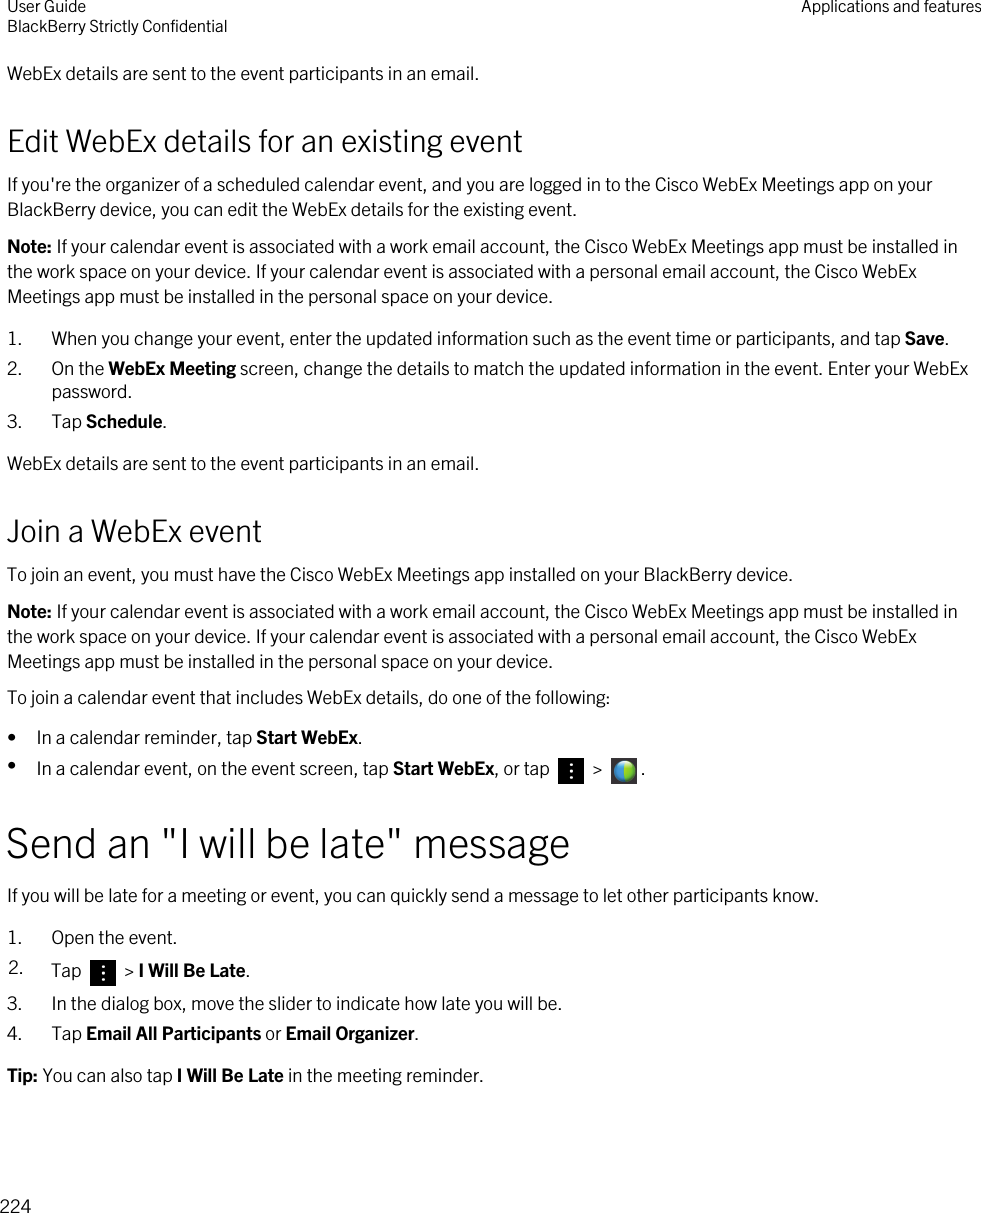 WebEx details are sent to the event participants in an email.Edit WebEx details for an existing eventIf you&apos;re the organizer of a scheduled calendar event, and you are logged in to the Cisco WebEx Meetings app on your BlackBerry device, you can edit the WebEx details for the existing event.Note: If your calendar event is associated with a work email account, the Cisco WebEx Meetings app must be installed in the work space on your device. If your calendar event is associated with a personal email account, the Cisco WebEx Meetings app must be installed in the personal space on your device.1. When you change your event, enter the updated information such as the event time or participants, and tap Save.2. On the WebEx Meeting screen, change the details to match the updated information in the event. Enter your WebEx password.3. Tap Schedule.WebEx details are sent to the event participants in an email.Join a WebEx eventTo join an event, you must have the Cisco WebEx Meetings app installed on your BlackBerry device.Note: If your calendar event is associated with a work email account, the Cisco WebEx Meetings app must be installed in the work space on your device. If your calendar event is associated with a personal email account, the Cisco WebEx Meetings app must be installed in the personal space on your device.To join a calendar event that includes WebEx details, do one of the following:• In a calendar reminder, tap Start WebEx.•In a calendar event, on the event screen, tap Start WebEx, or tap   &gt;  .Send an &quot;I will be late&quot; messageIf you will be late for a meeting or event, you can quickly send a message to let other participants know.1. Open the event.2. Tap   &gt; I Will Be Late.3. In the dialog box, move the slider to indicate how late you will be.4. Tap Email All Participants or Email Organizer.Tip: You can also tap I Will Be Late in the meeting reminder.User GuideBlackBerry Strictly Confidential Applications and features224